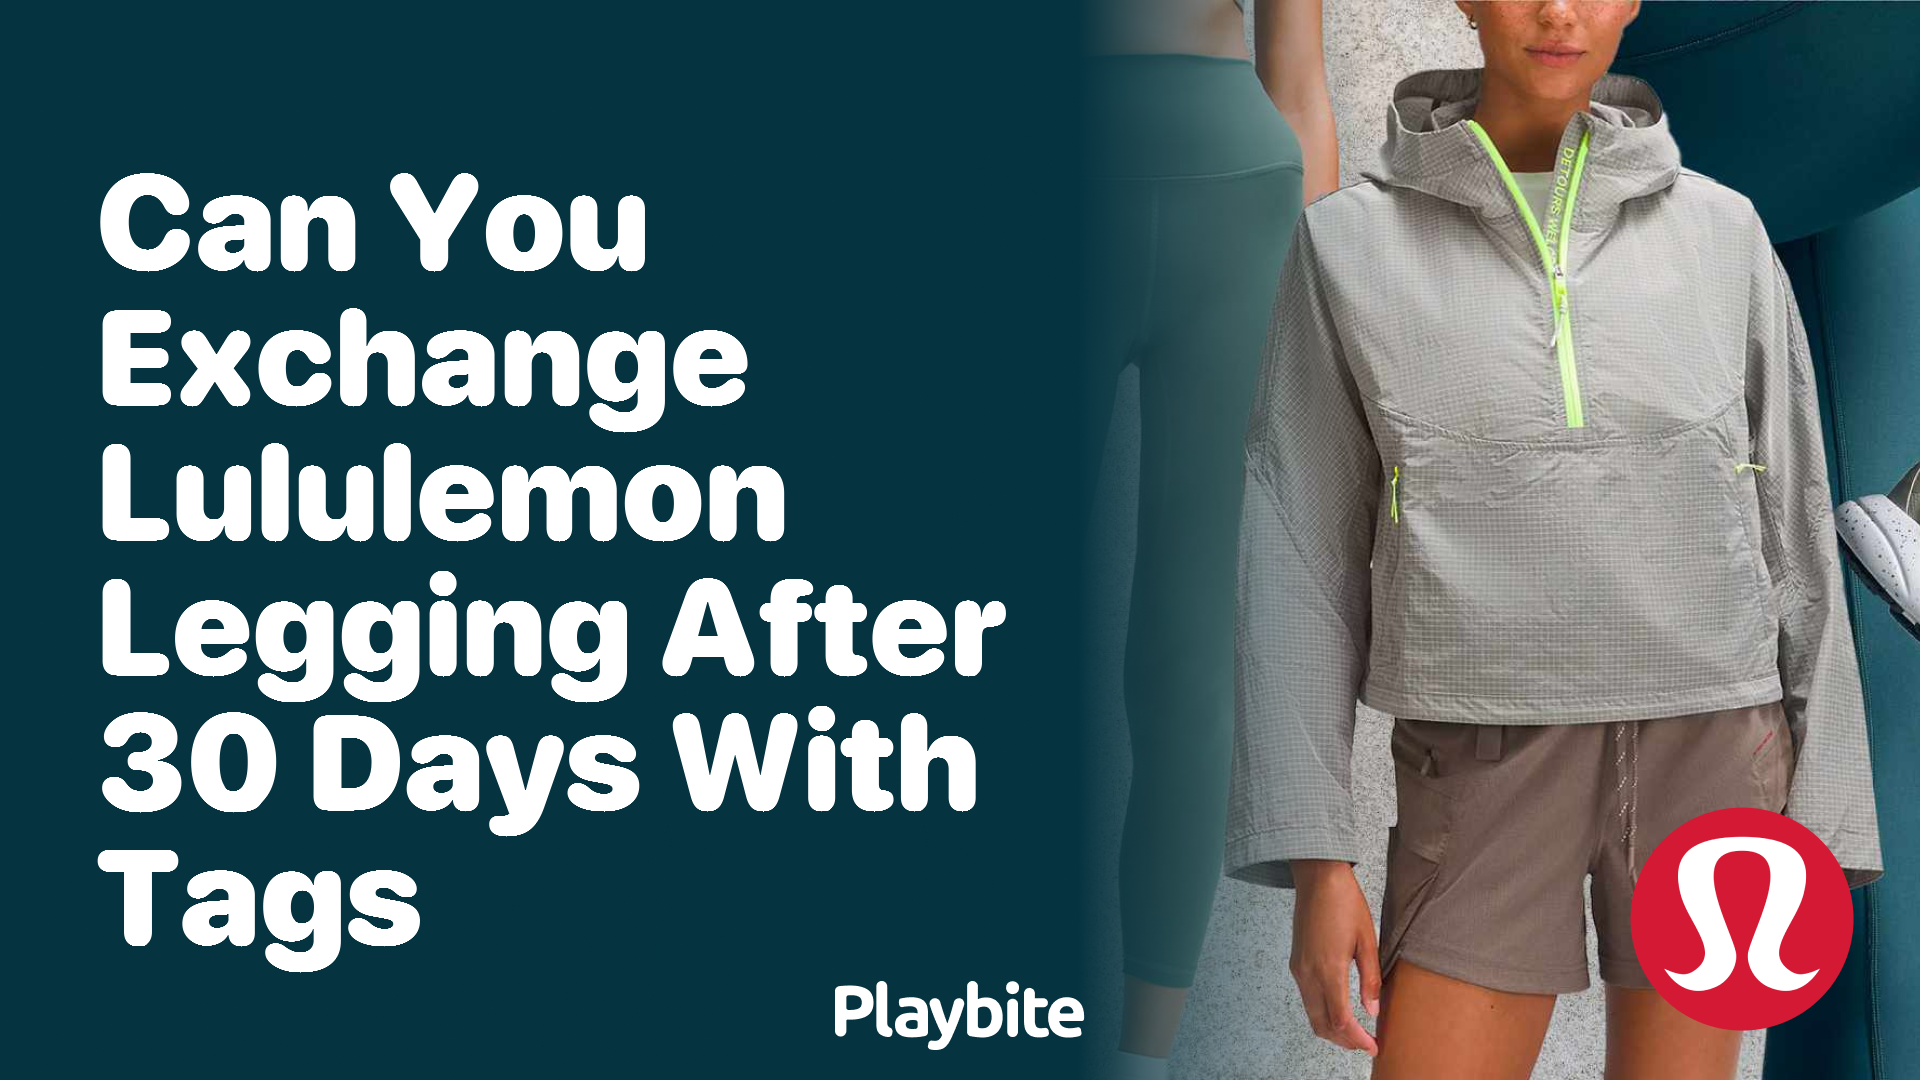 Can You Exchange Lululemon Leggings After 30 Days With Tags